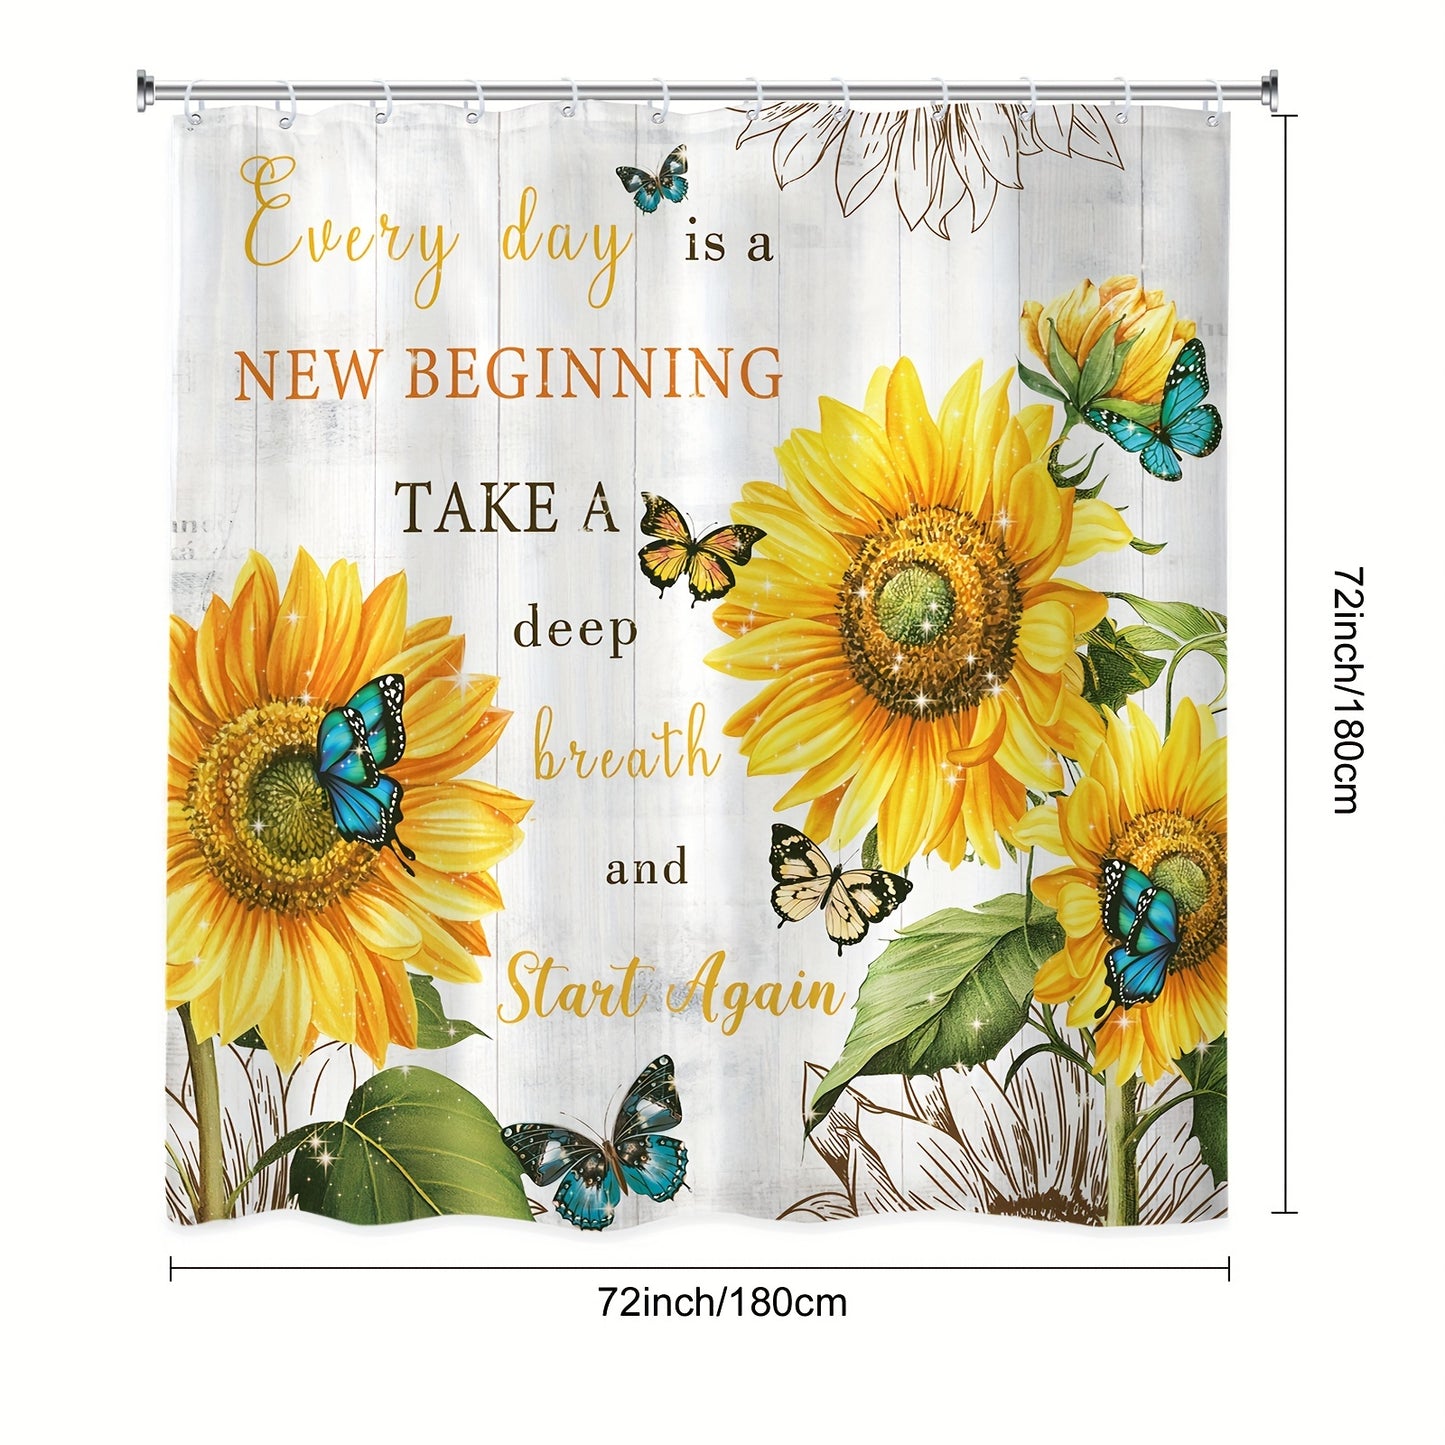 Every Day Is A New Beginning Christian Shower Curtain, 72Wx72H Inch  With 12 Hooks claimedbygoddesigns